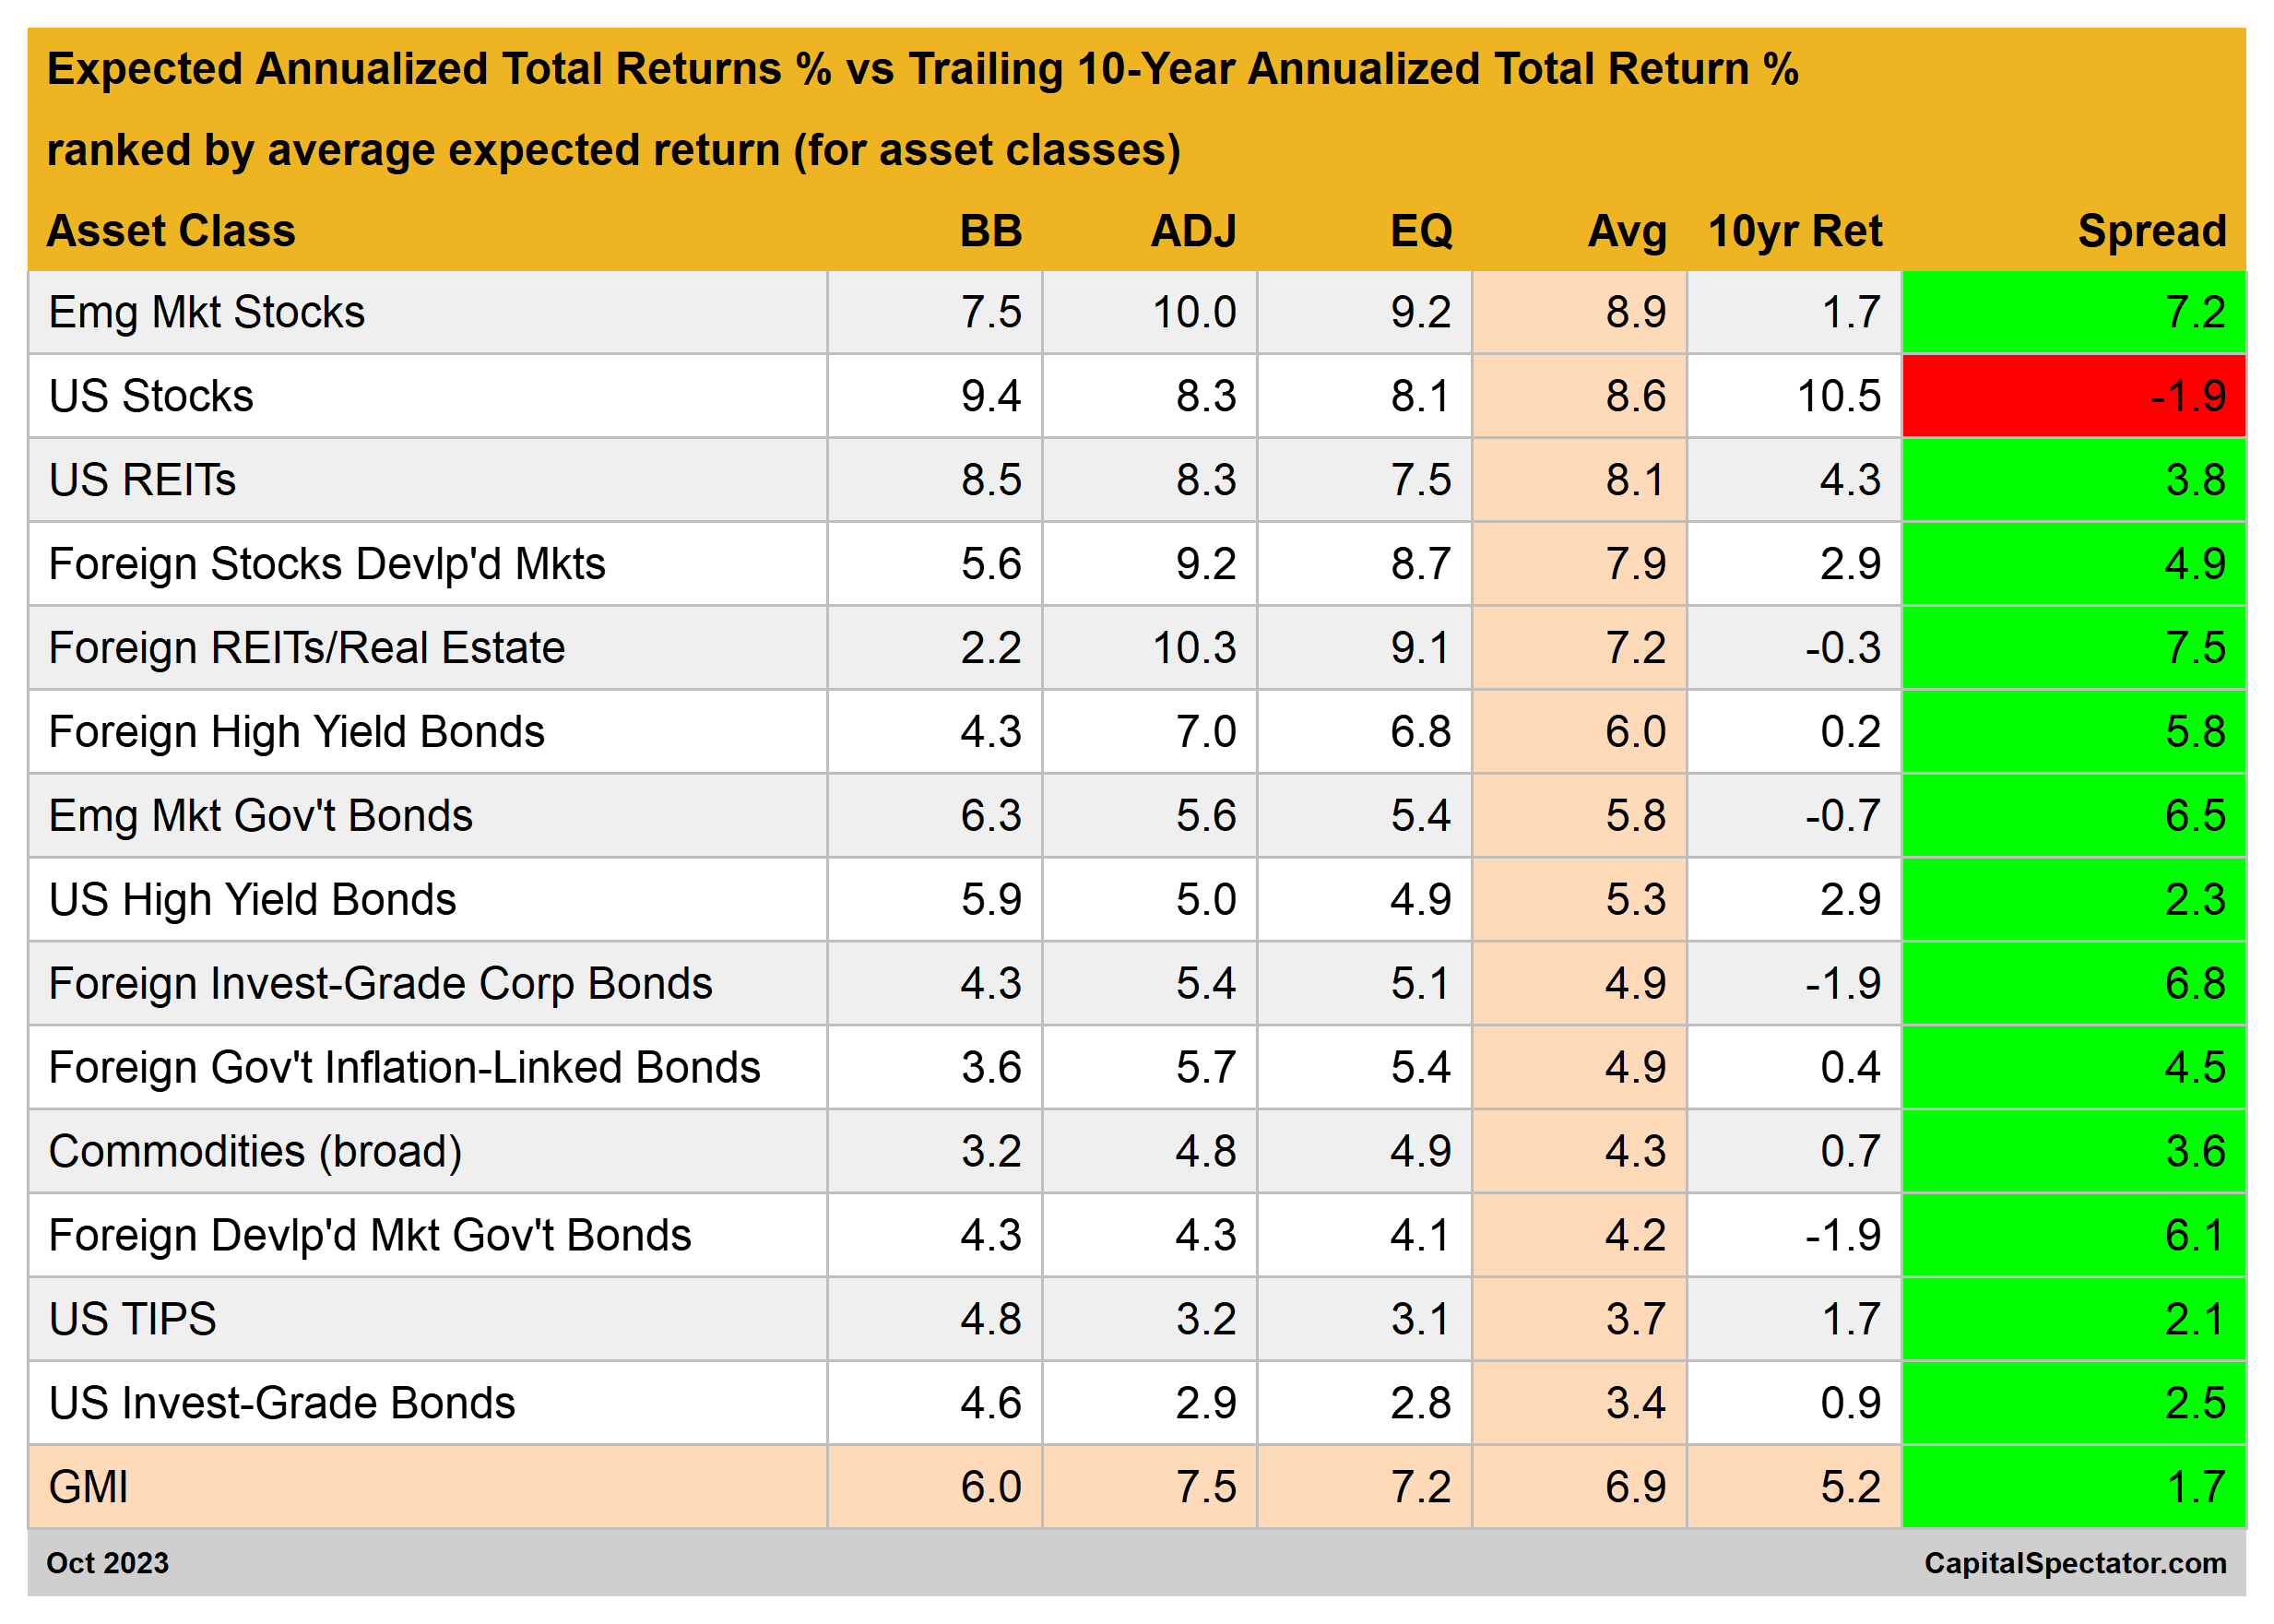 Expected Annual Total Returns